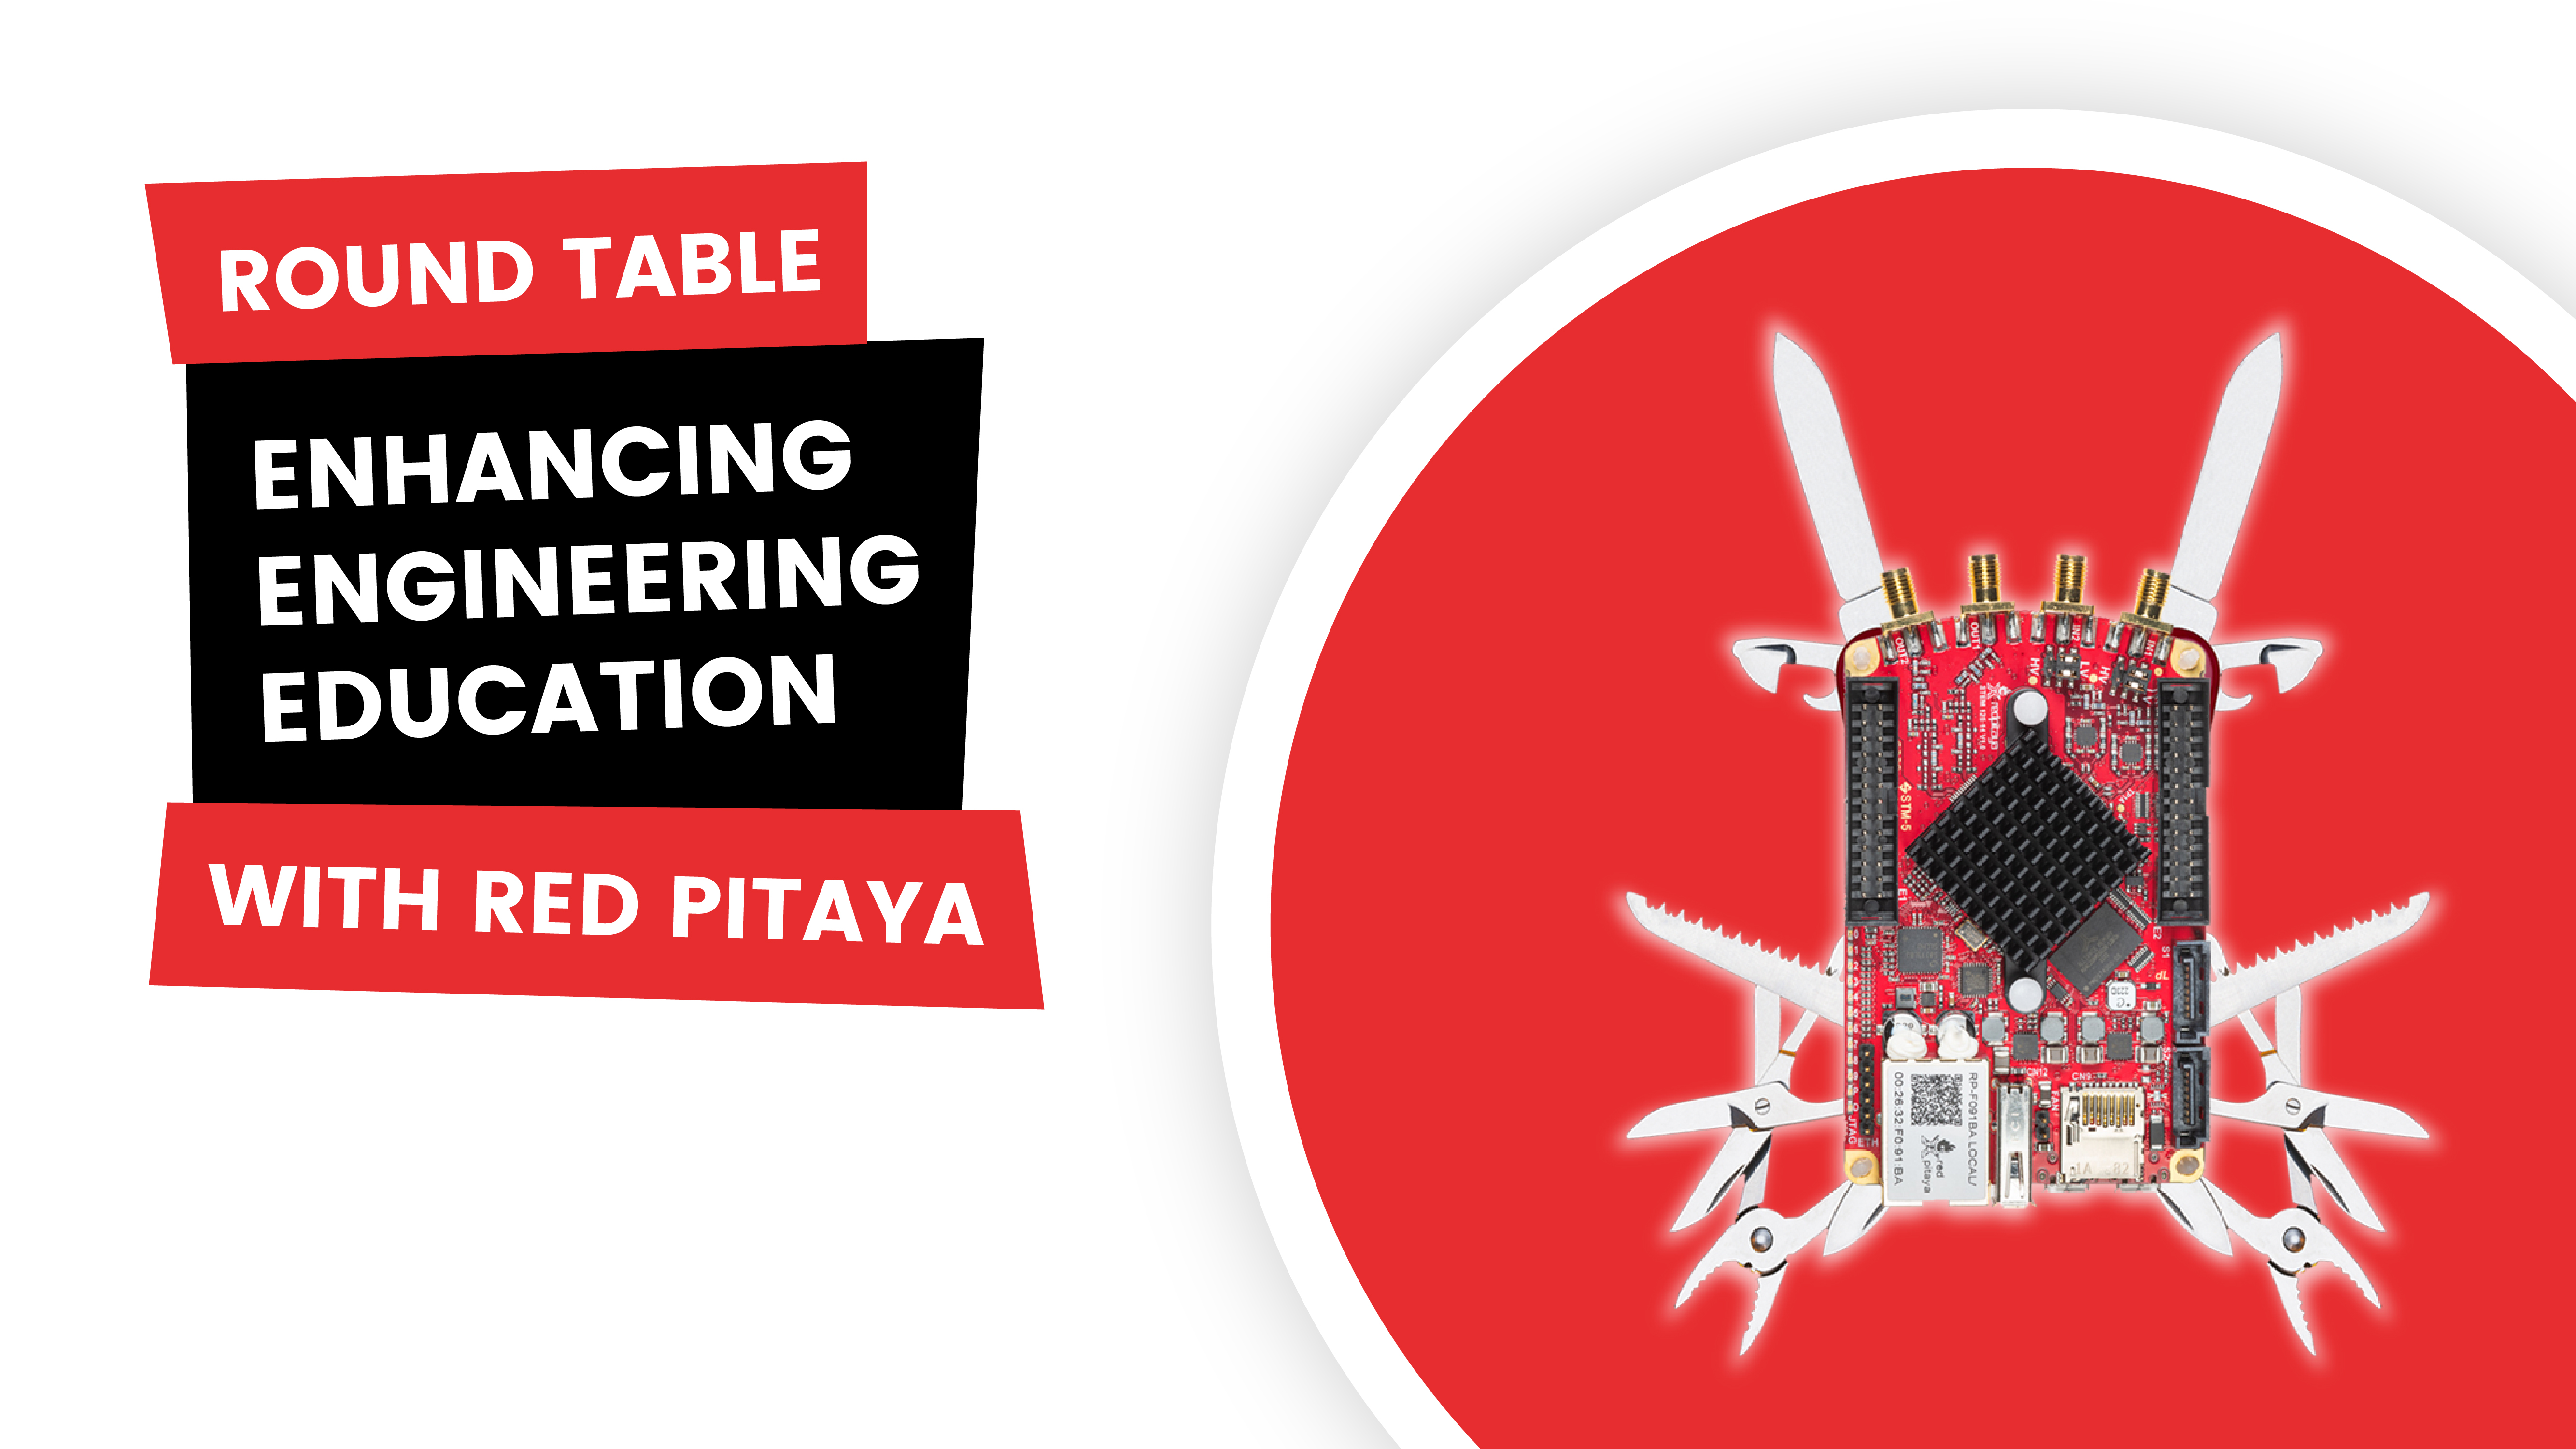 We hosted a Round table: Enhancing Engineering Education with Red Pitaya